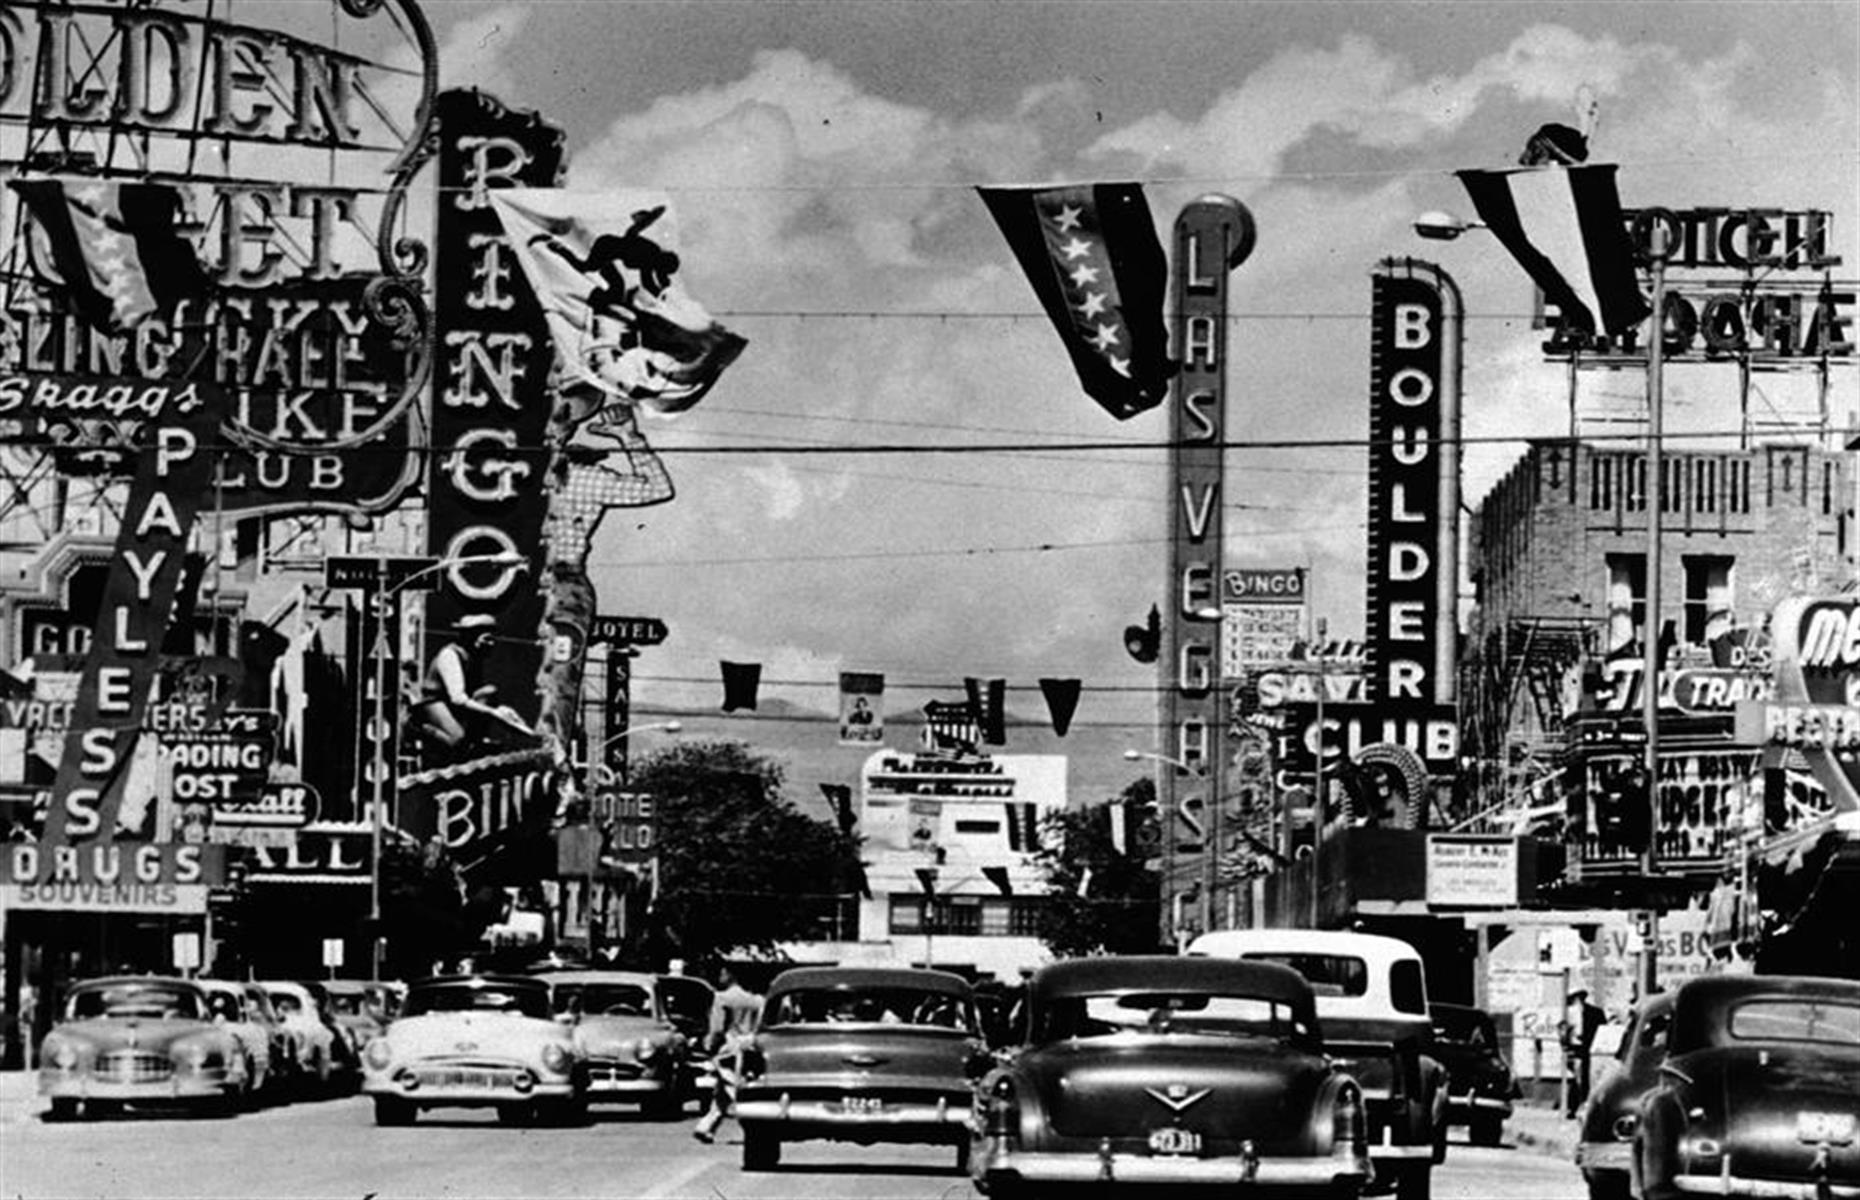 <p>Take a trip back in time to see historic images of some of the USA’s most popular tourist attractions from the 1900s until the 1990s. Some are long gone while others are still popular today.</p>